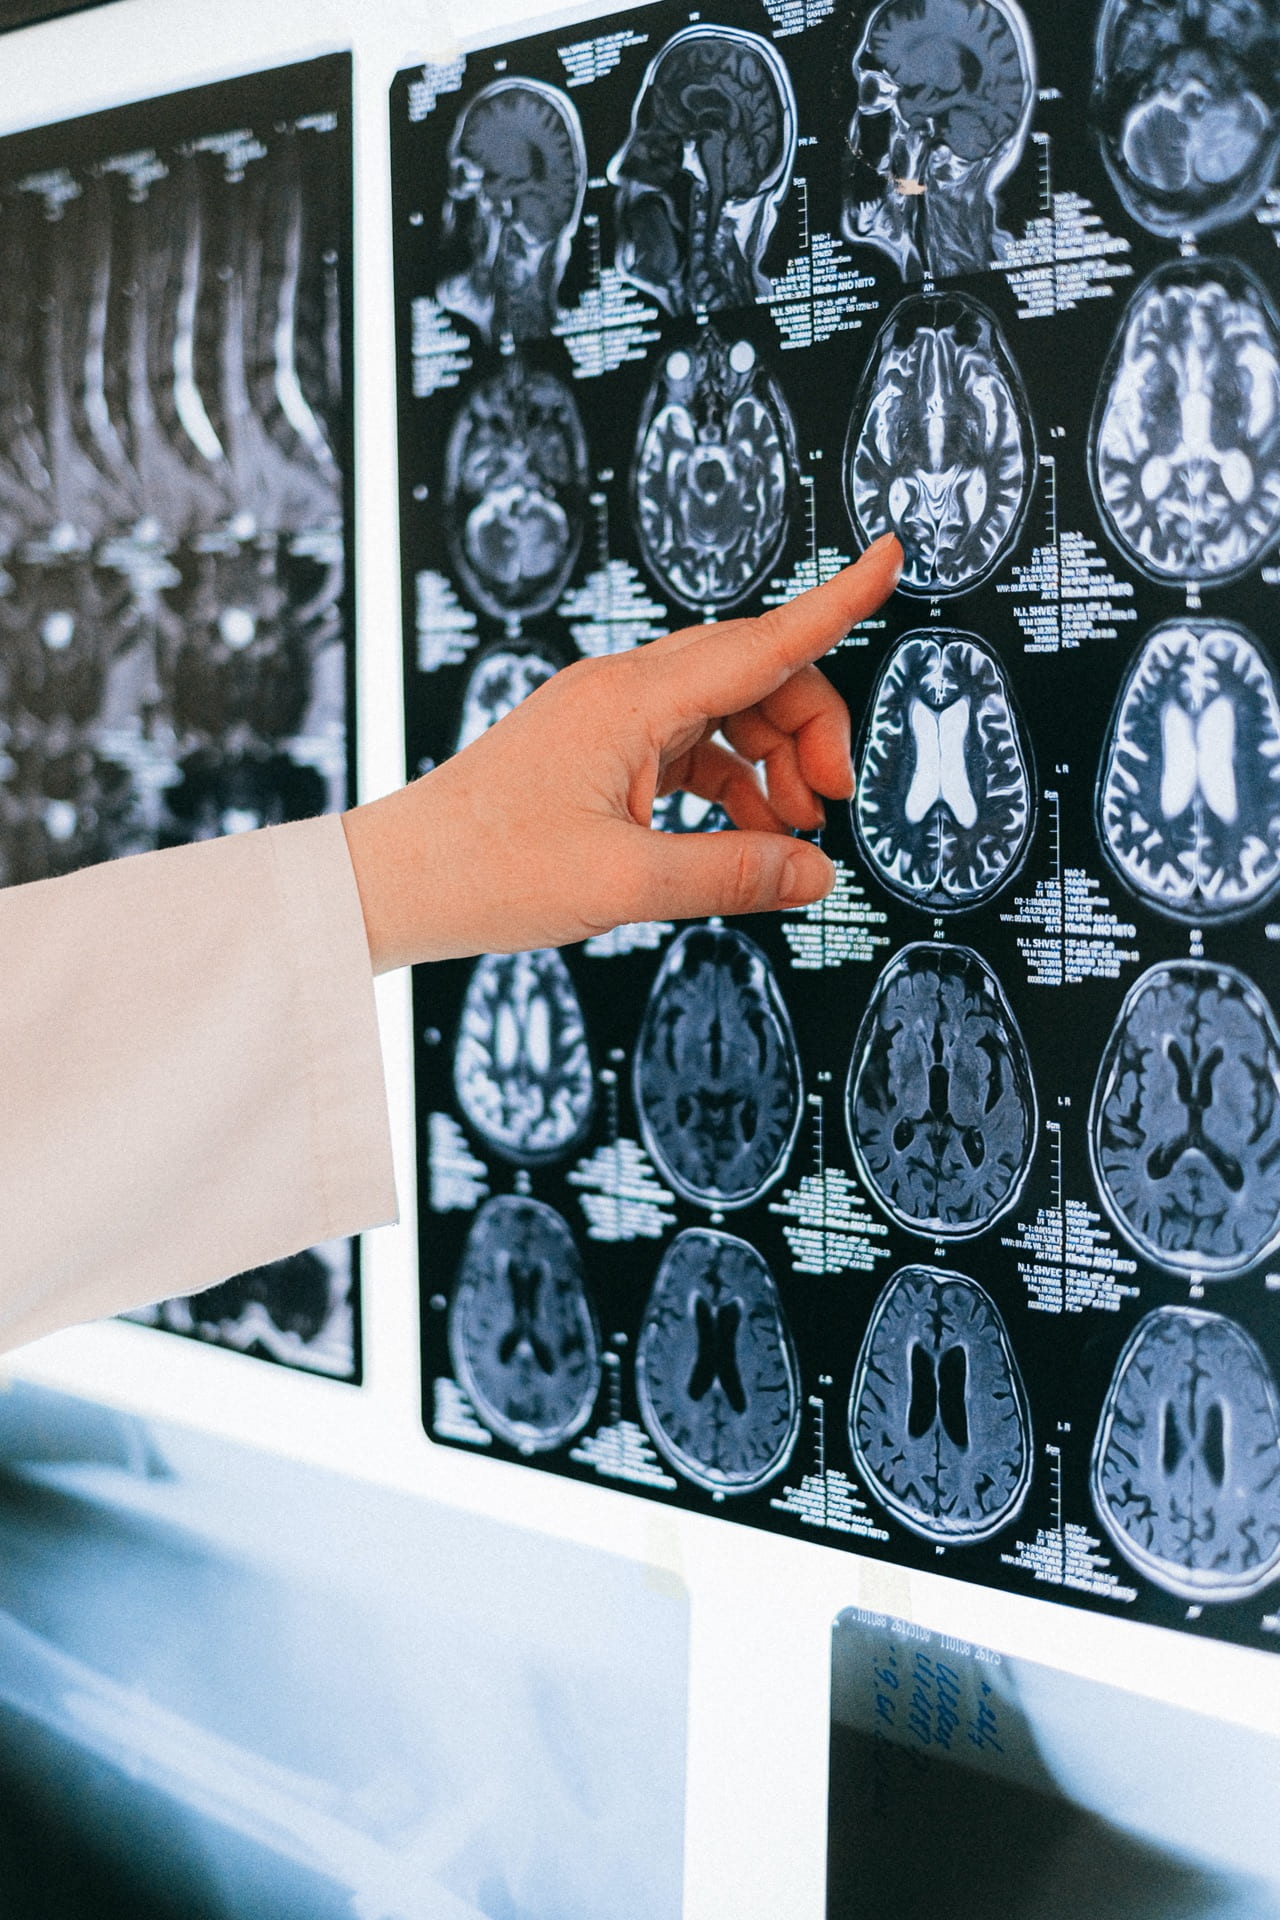 Image showing a doctor pointing to a brain scan generated by an MRI machine.